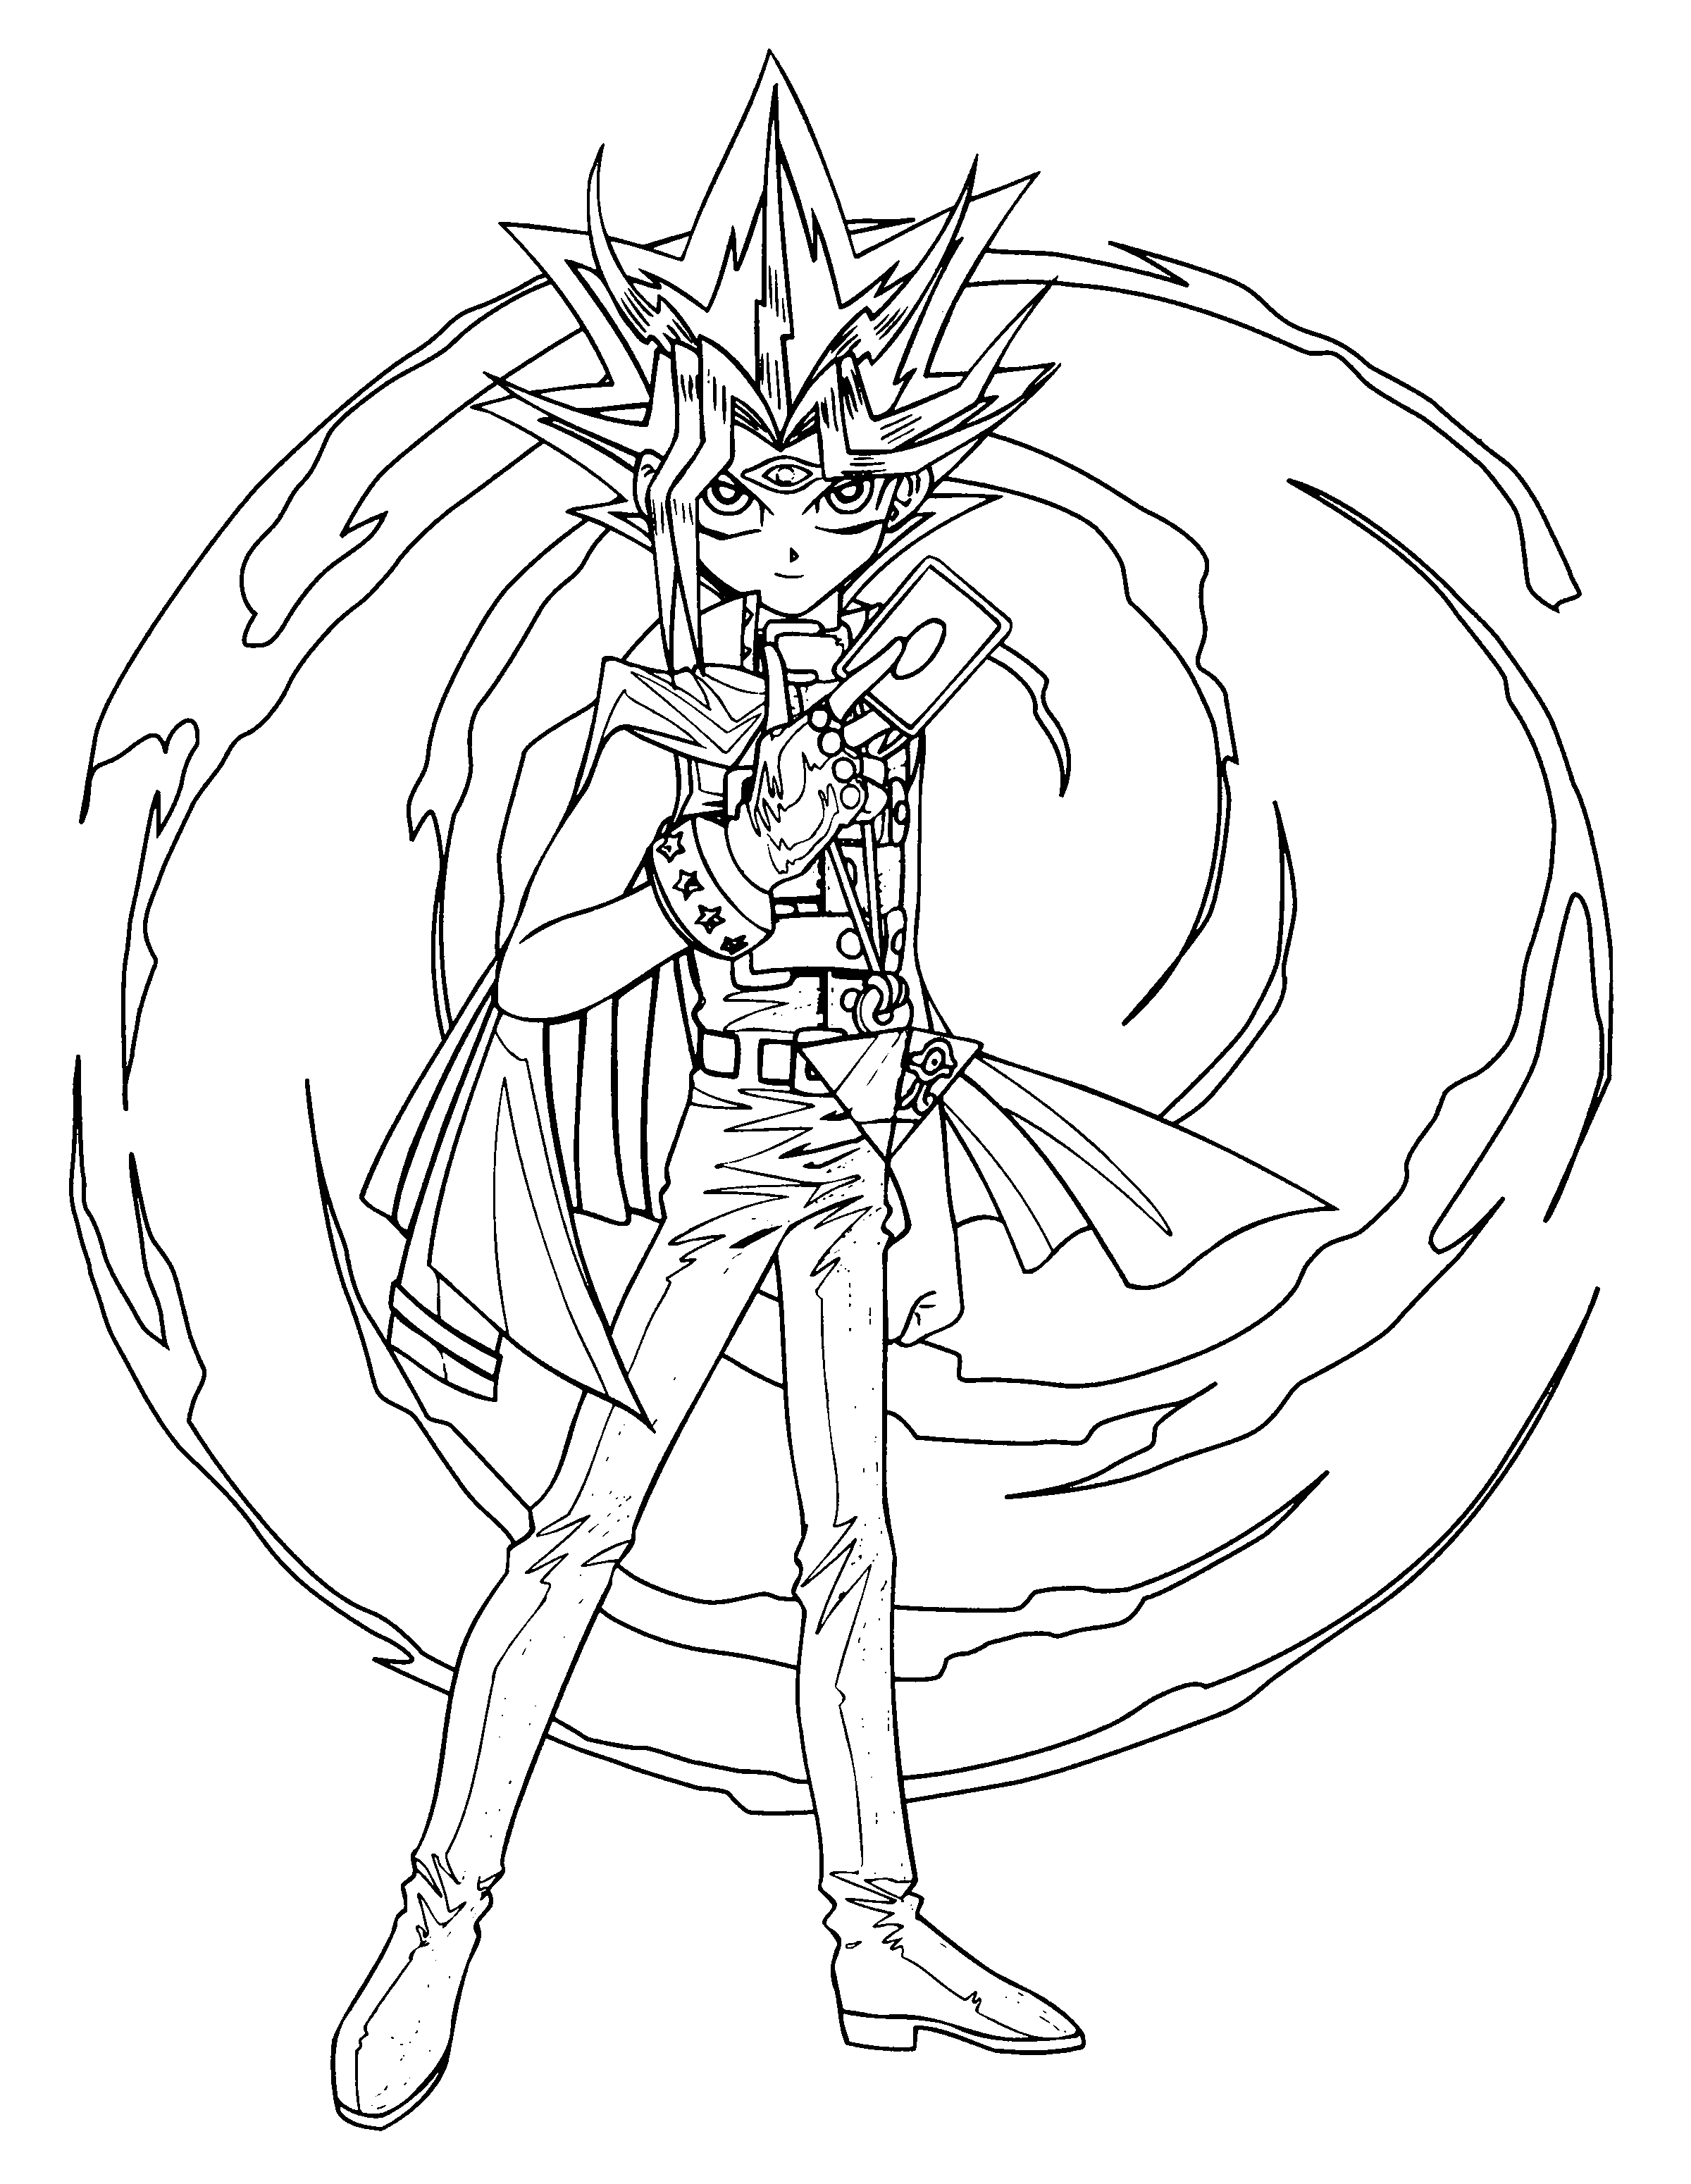 animated-coloring-pages-yu-gi-oh-image-0043